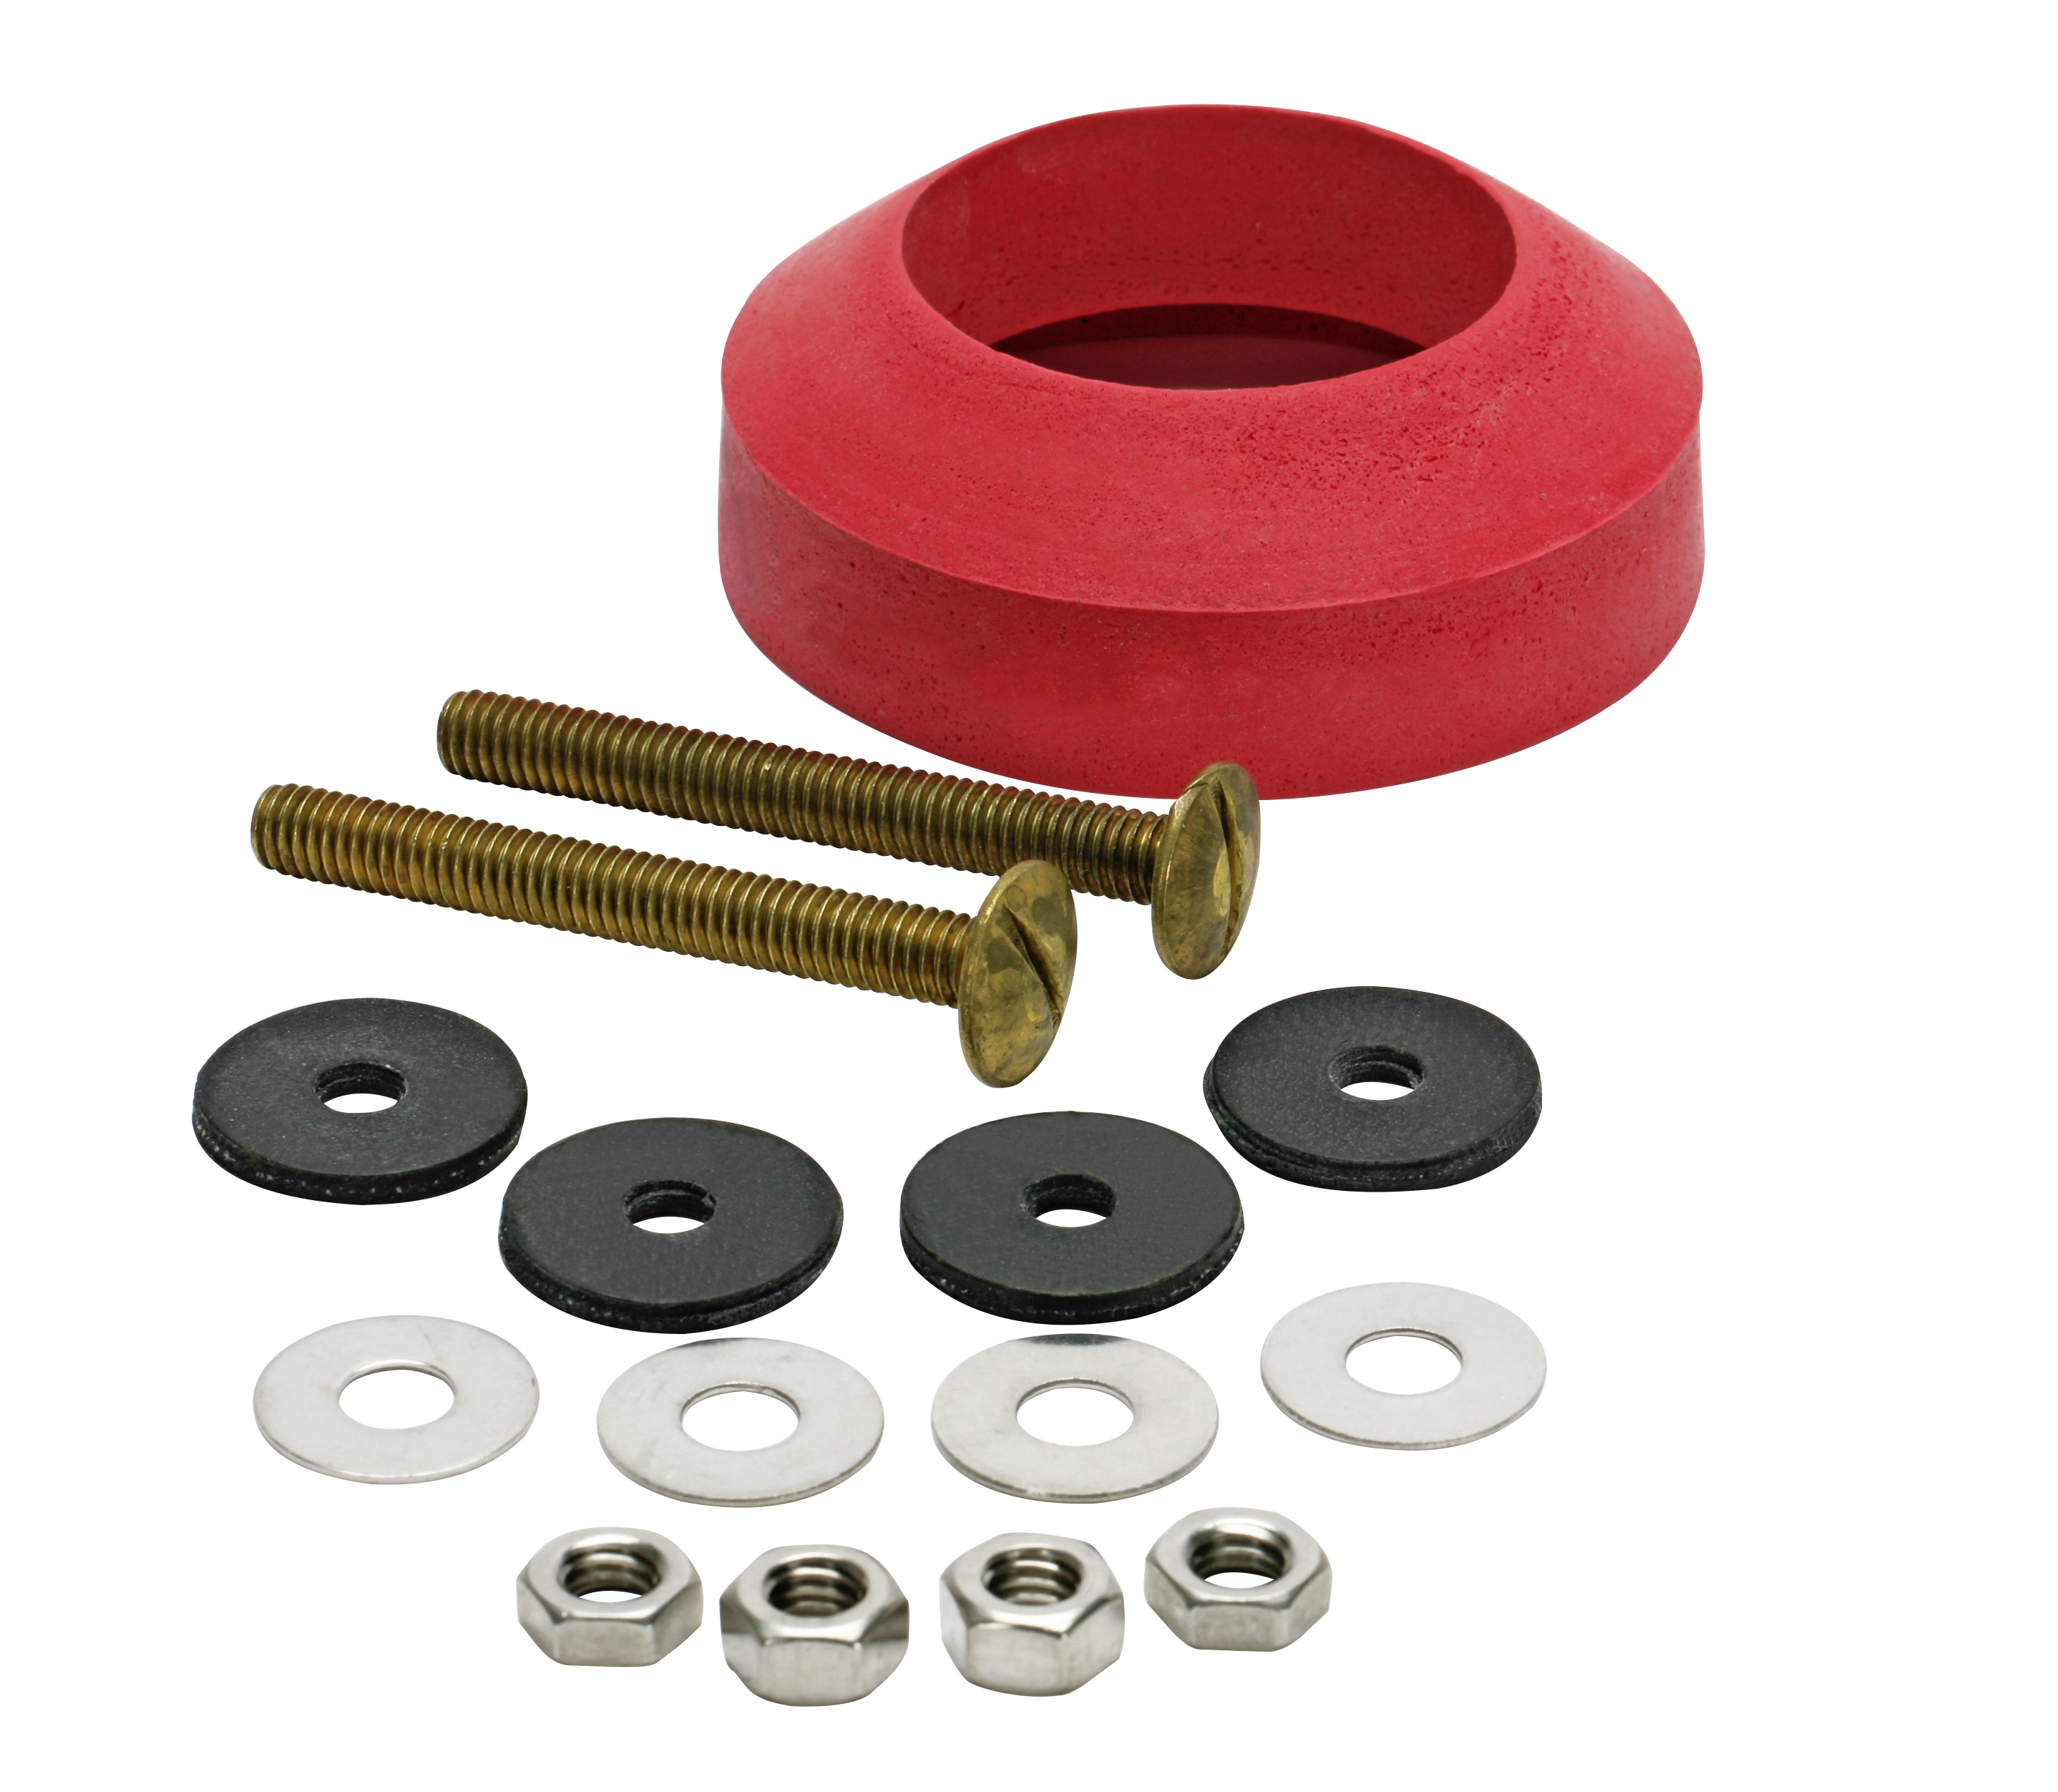 Fluidmaster 6102 Universal 2-inch Tank-To-Bowl Gasket and Hardware 2 Bolts, New, 1-Pack - image 1 of 4